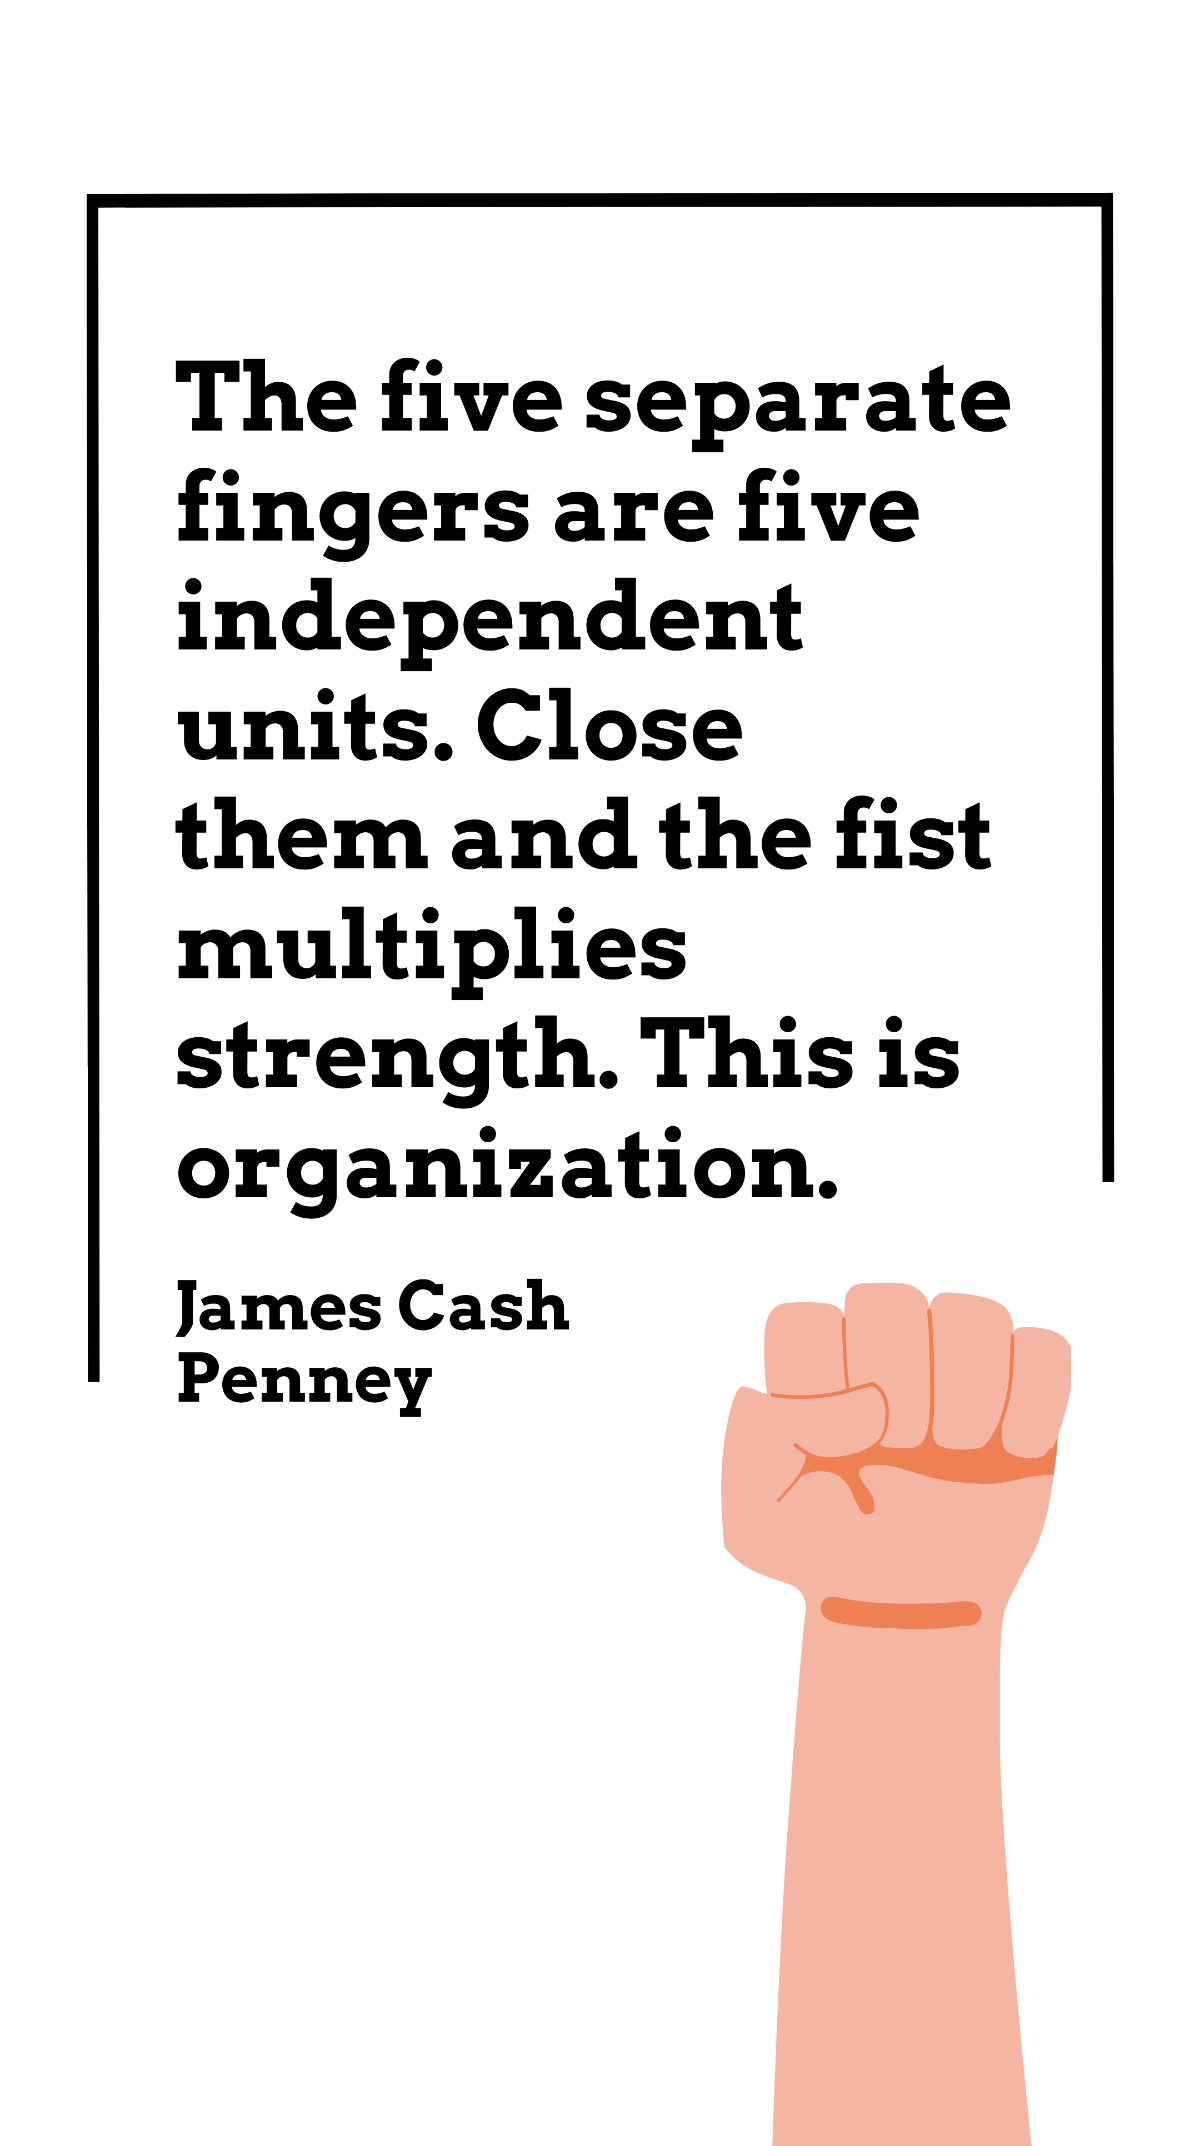 James Cash Penney - The five separate fingers are five independent units. Close them and the fist multiplies strength. This is organization. Template